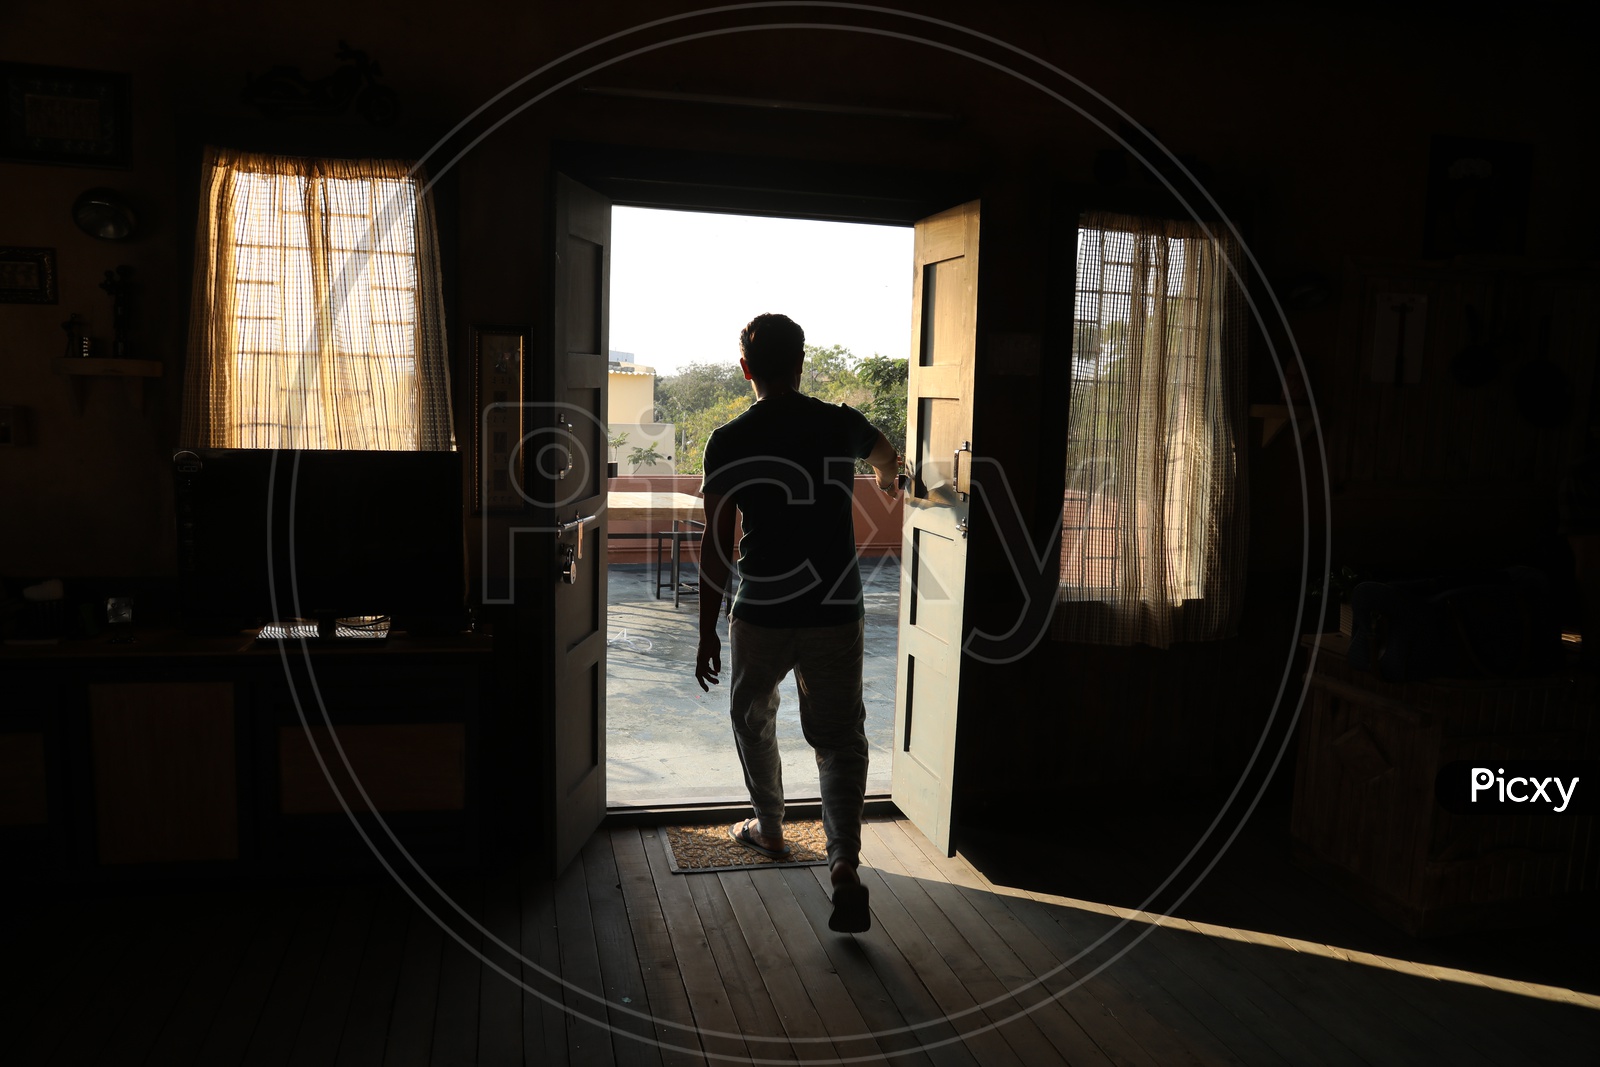 Silhouette Of a man Standing At Door Entrance